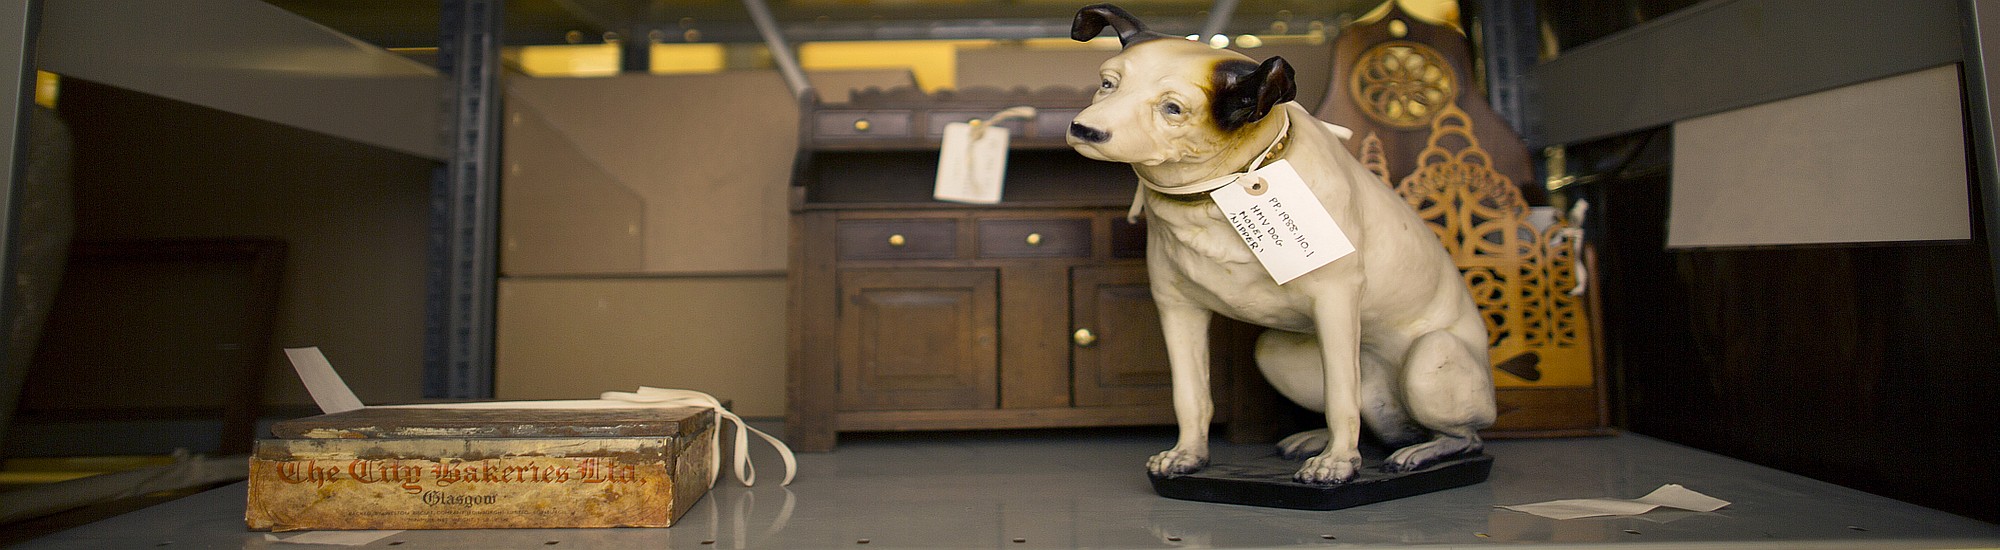 Glasgow Museums Social History Collection - HMV Dog